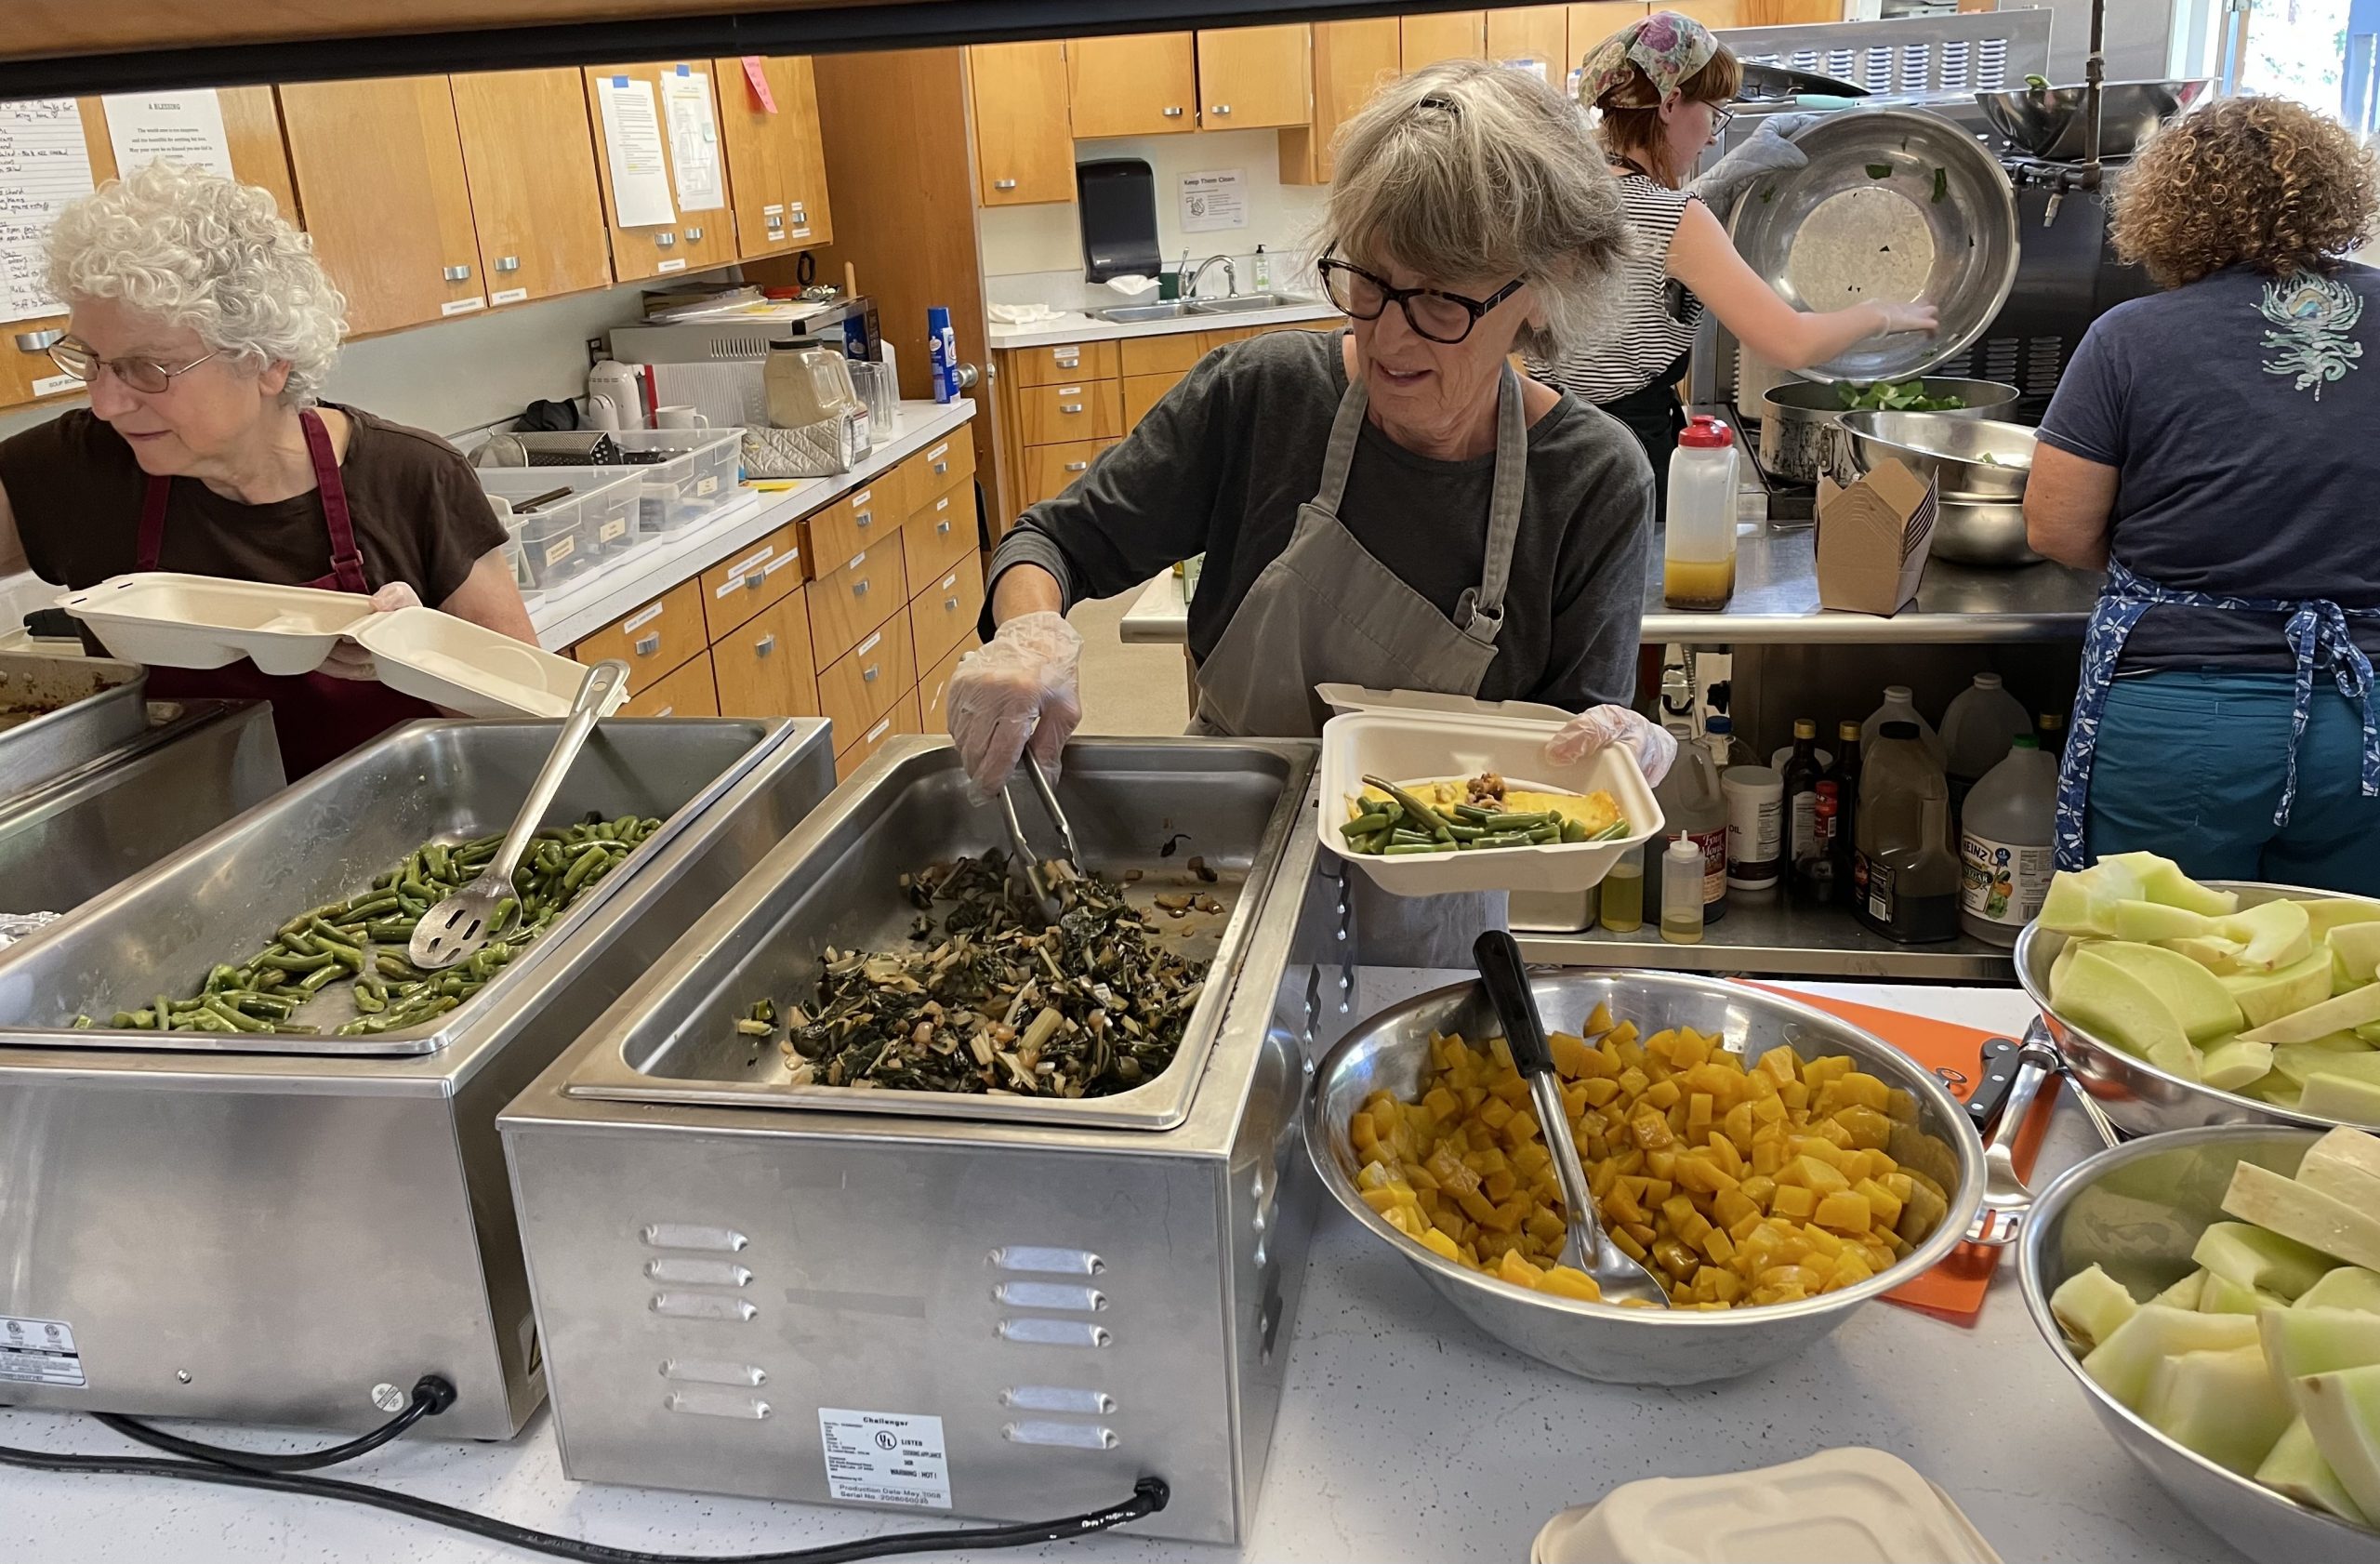 Four women in aprons, volunteers at the Maple Alley Inn kitchen, stand in the kitchen preparing and doling out food for guests to the hot meals program.